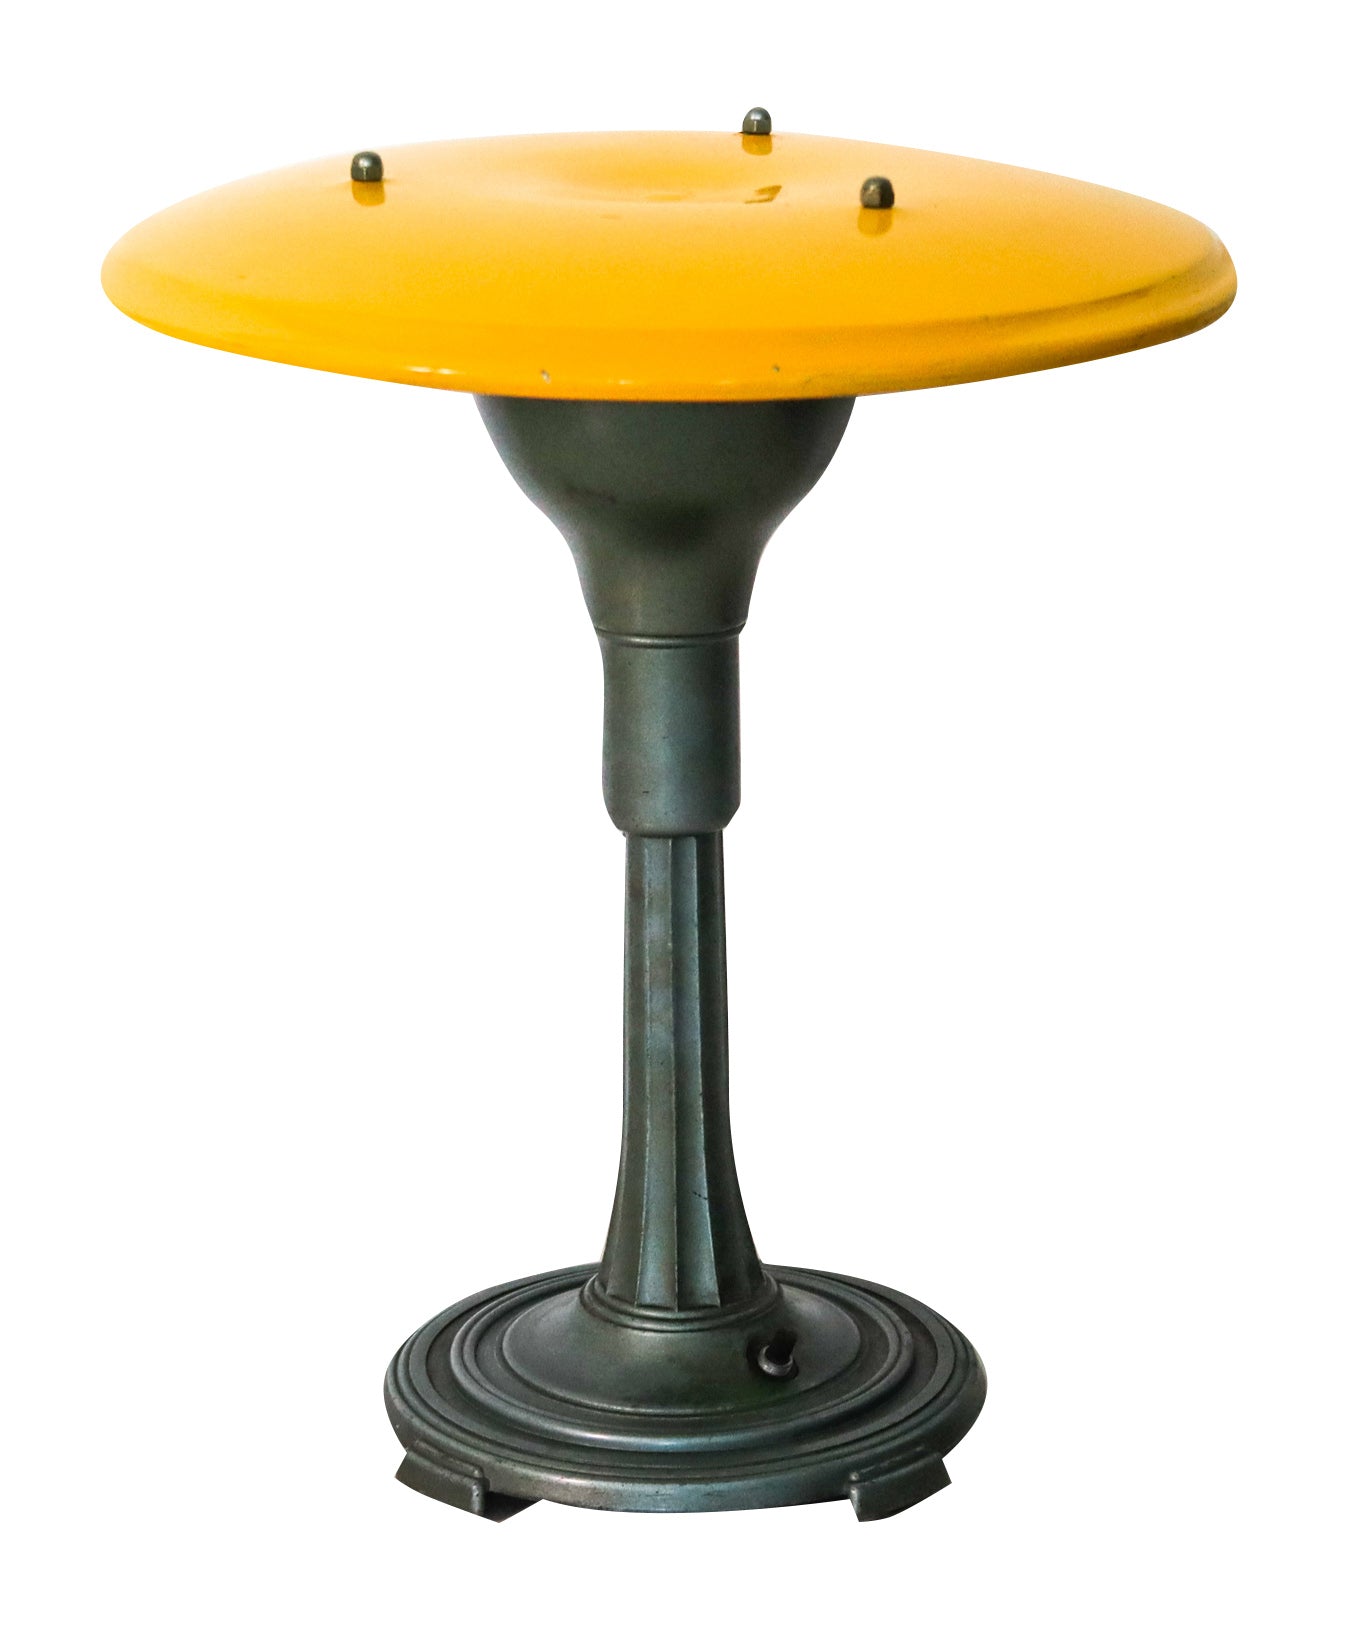 Melville G. Willer 1930 Art Deco Metalware Table Lamp With Yellow Lacquer